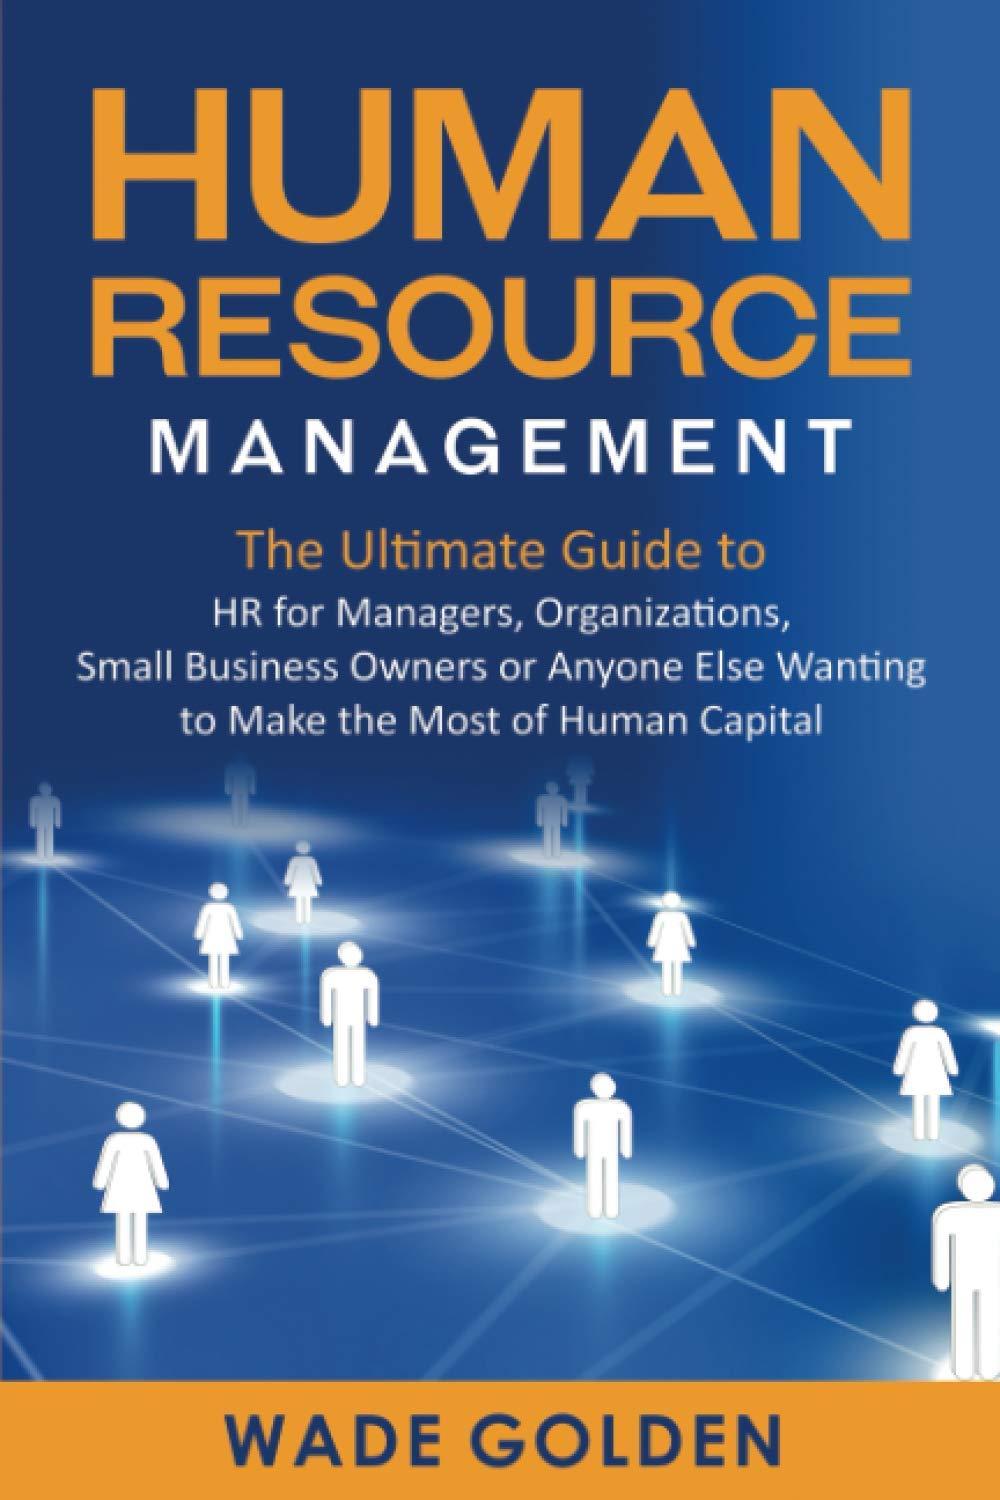 human resource management the ultimate guide to hr for managers organizations small business owners or anyone